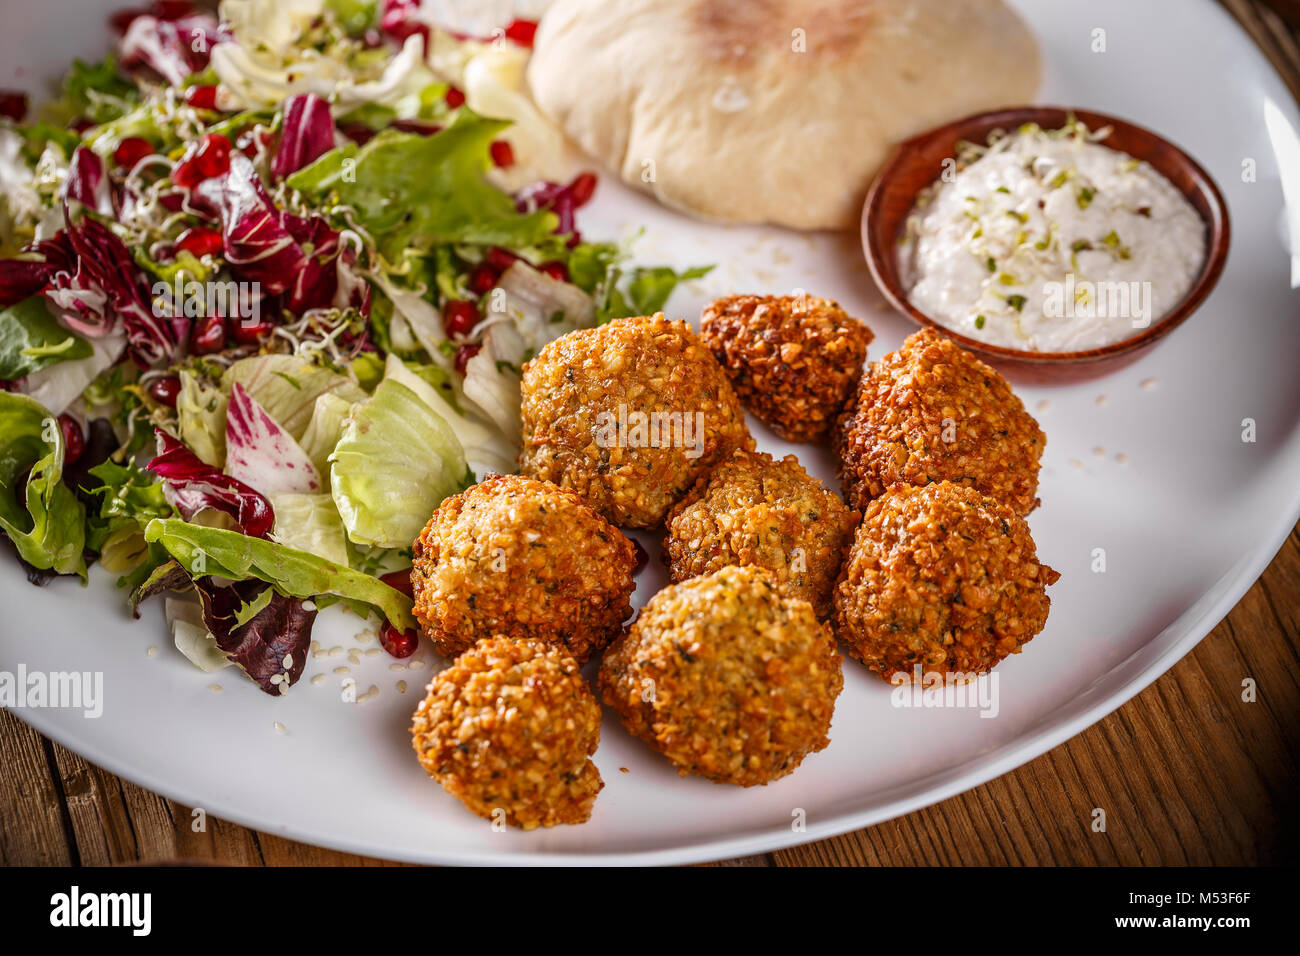 Falafel, deep fried balls of ground chickpeas with tahini sauce and lettuce Stock Photo